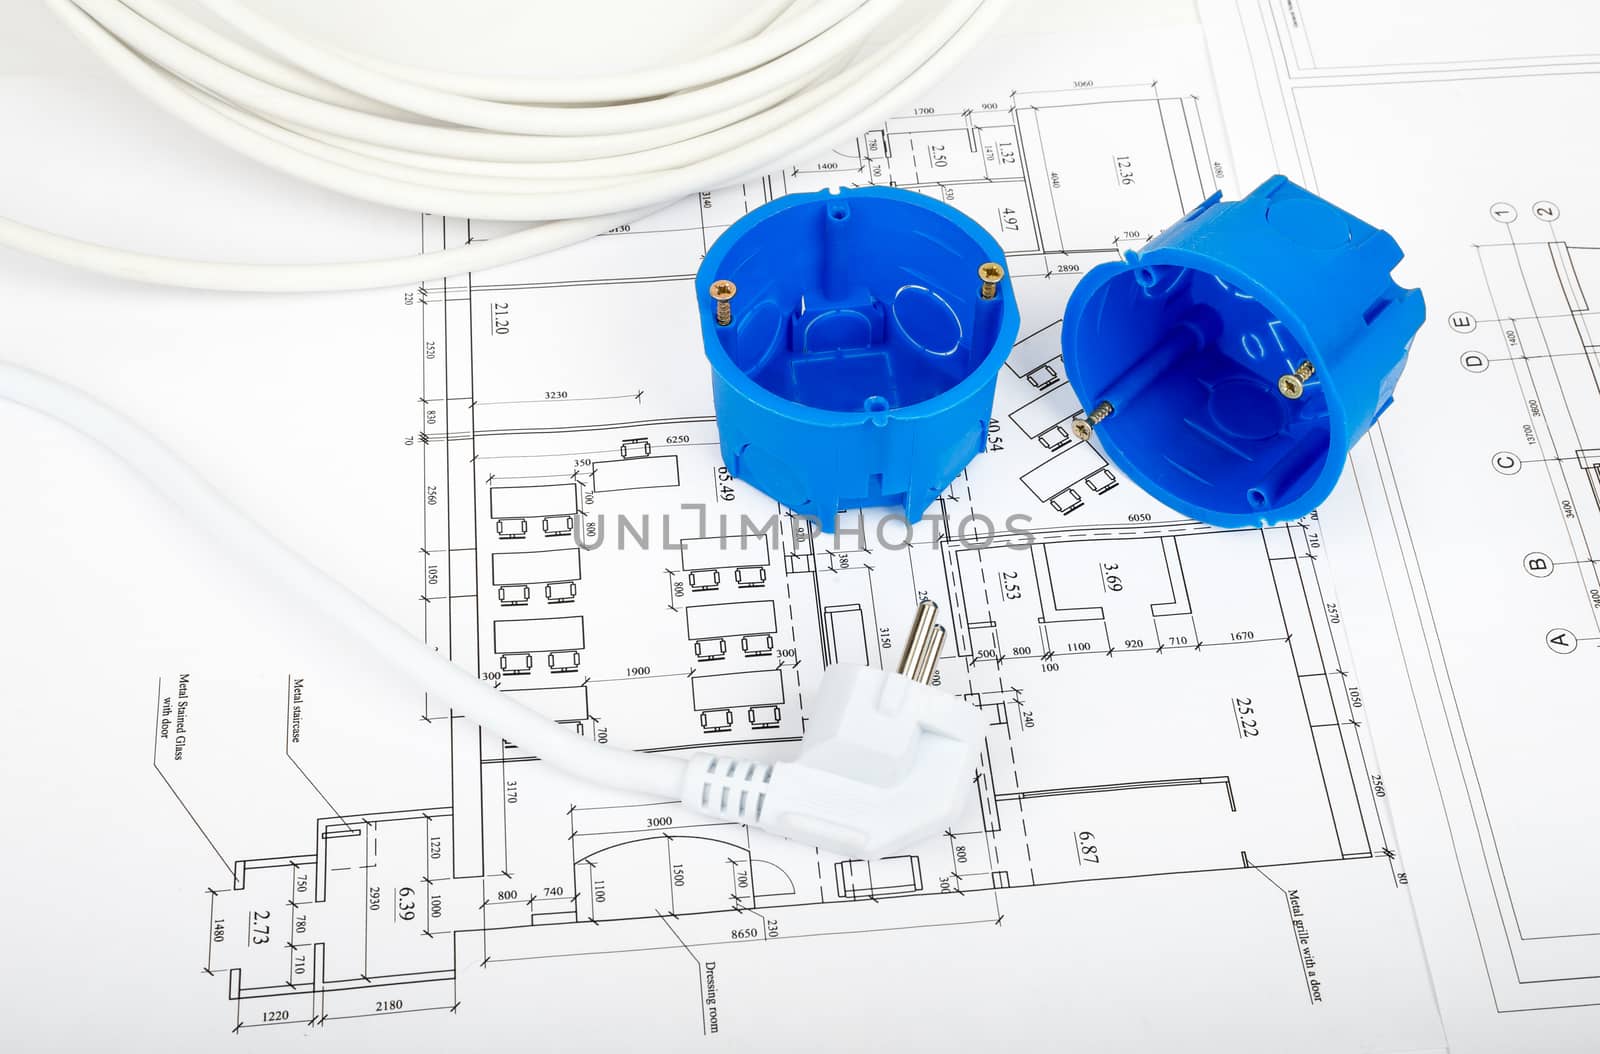 Architecture plan and rolls of blueprints with plug and blue plastic covers. Building concept